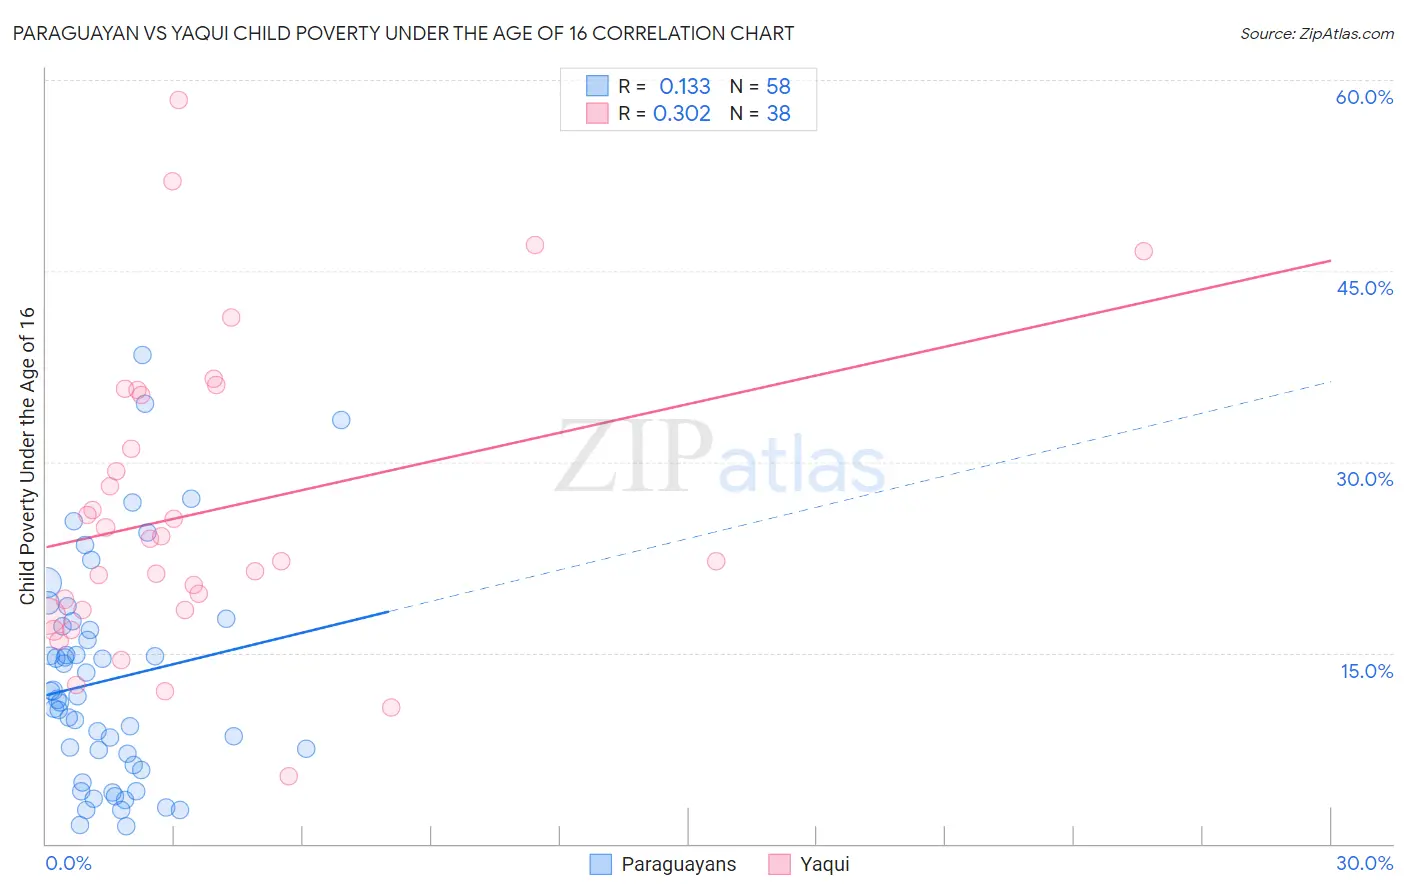 Paraguayan vs Yaqui Child Poverty Under the Age of 16